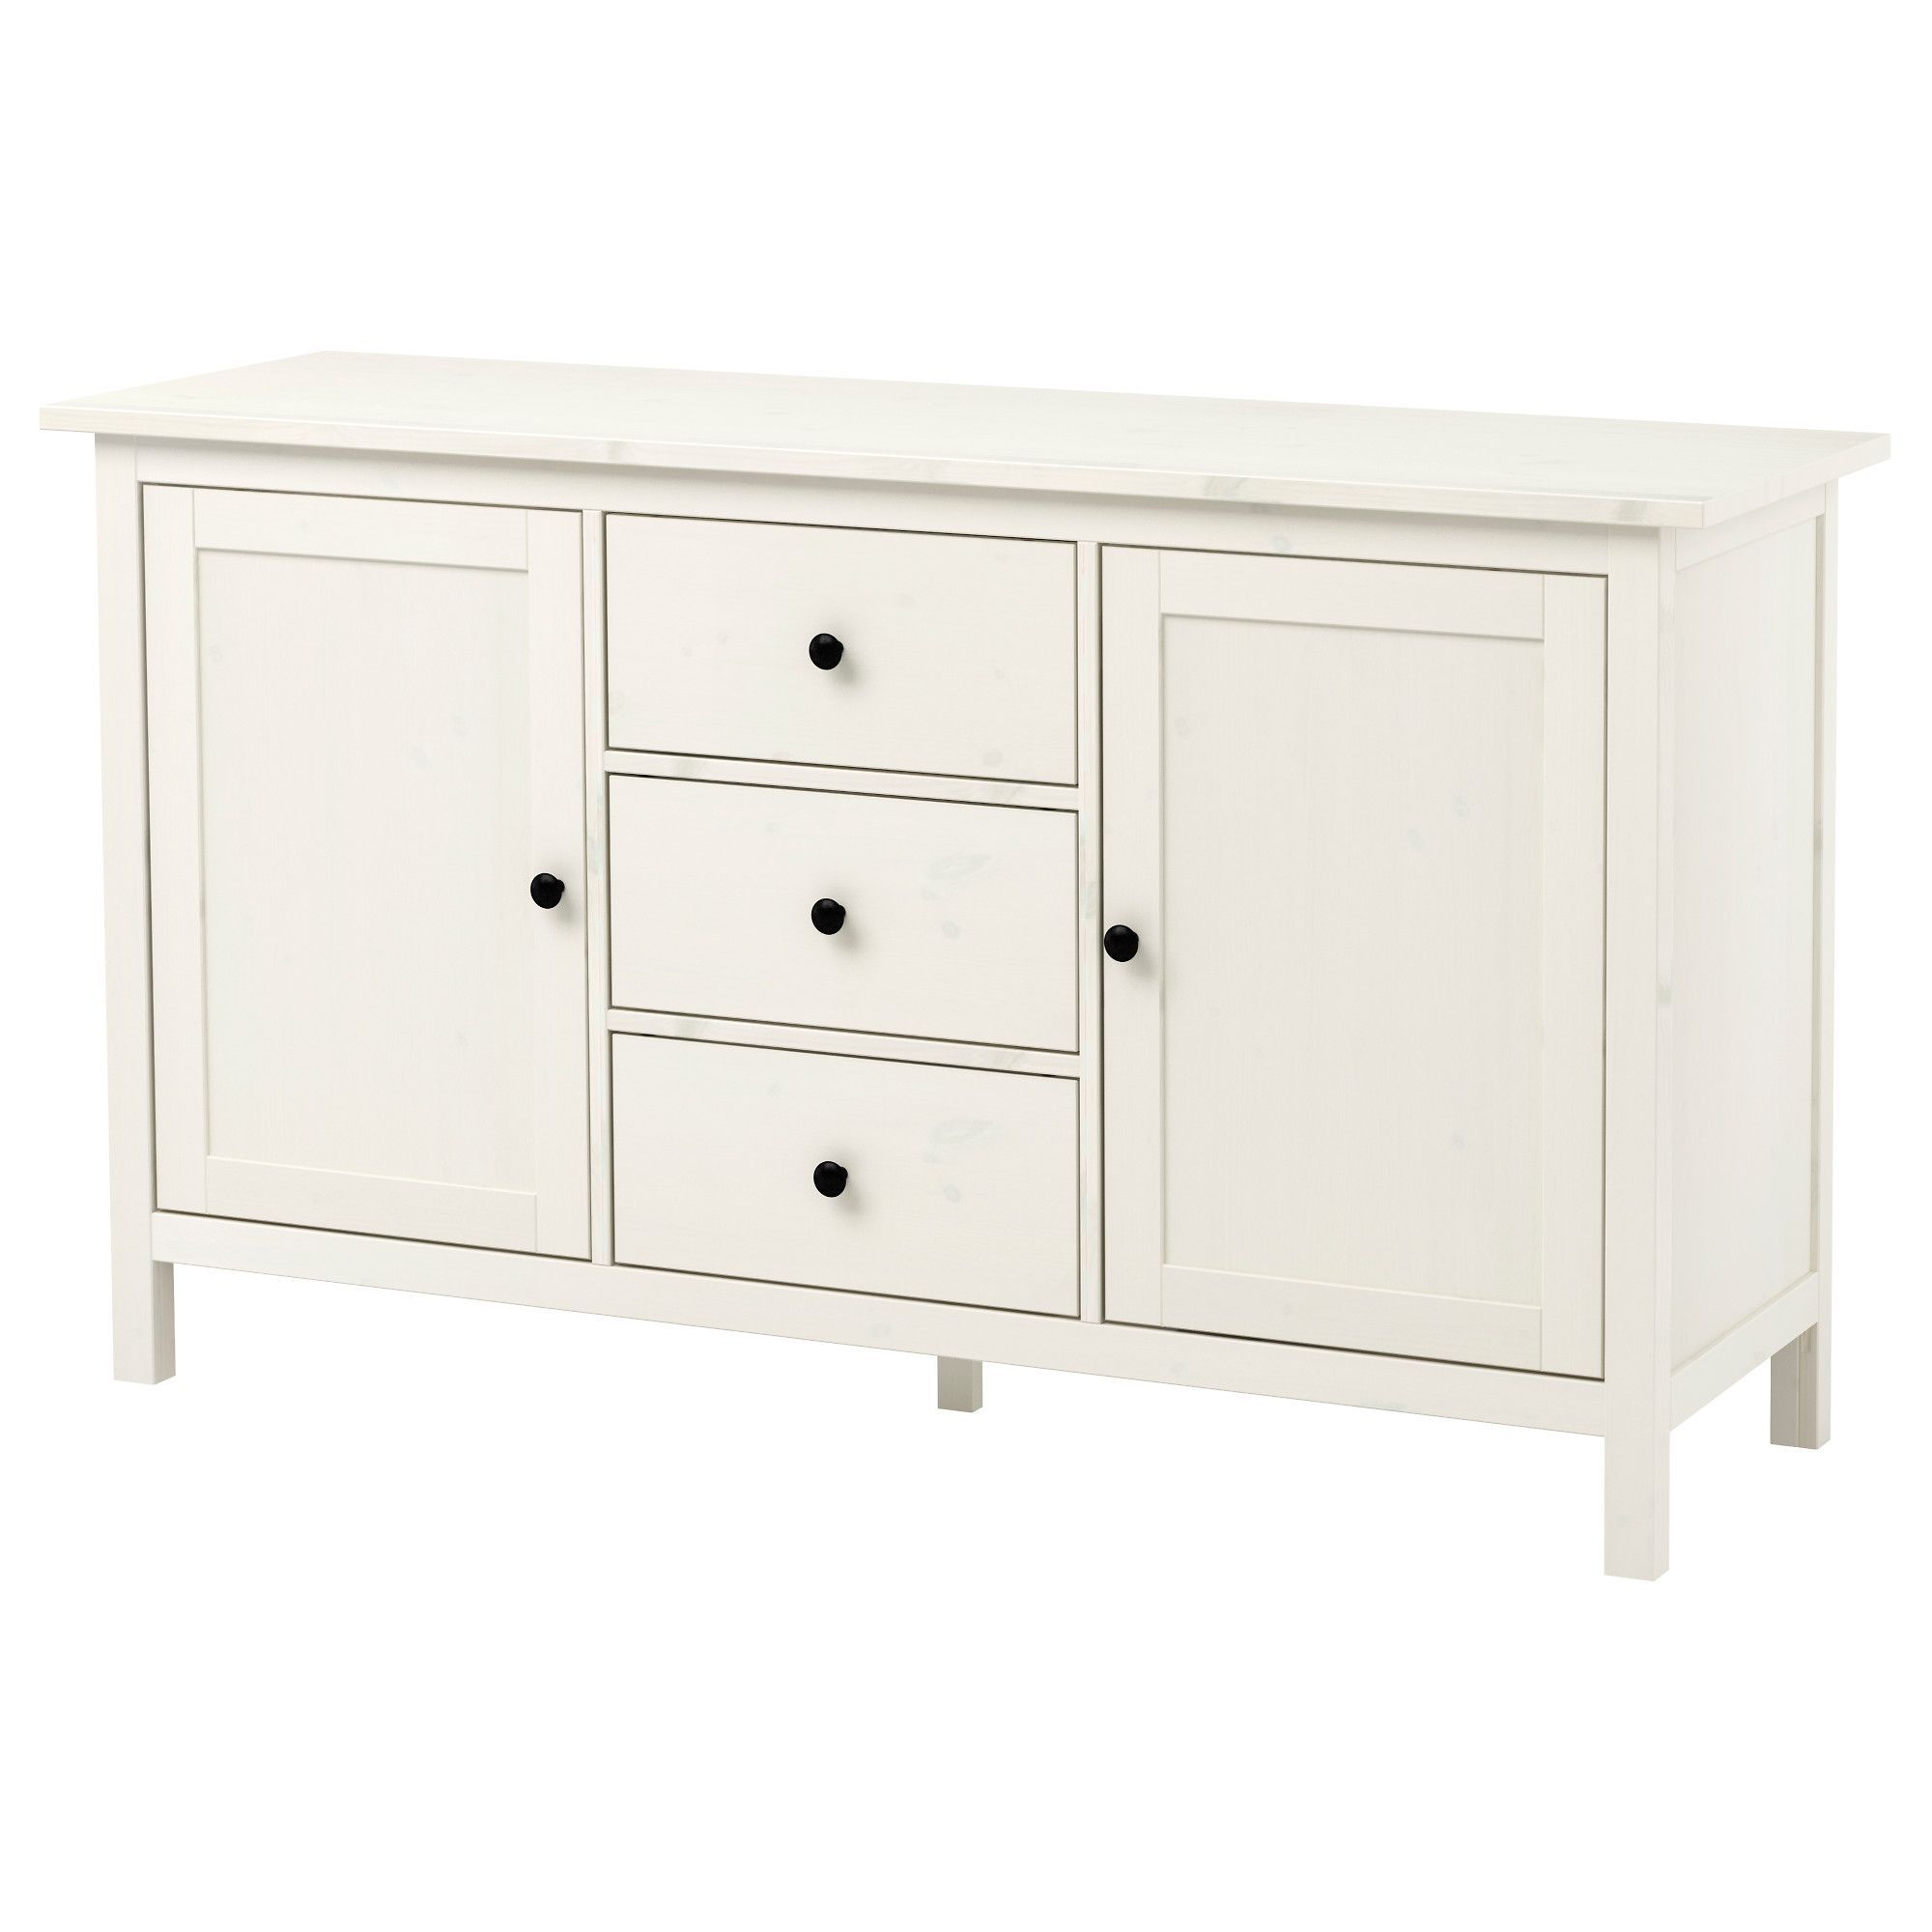 Hemnes Sideboard, White Stain | Closets, Storage & Organization With Palazzo 87 Inch Sideboards (View 4 of 30)